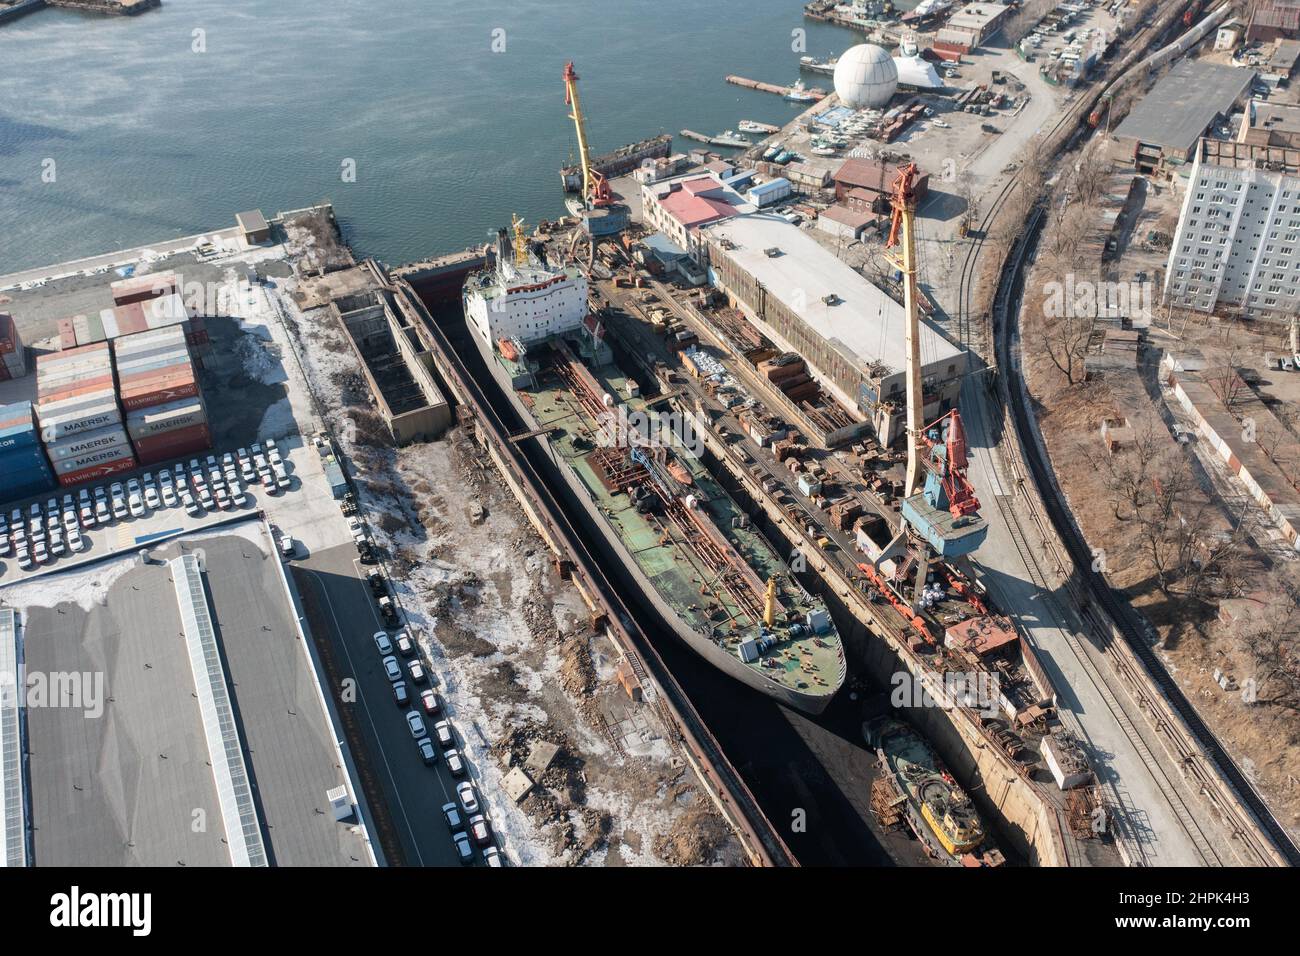 Vladivostok, Russia - February 5, 2022:A top view of the repair dock with the ship. Stock Photo